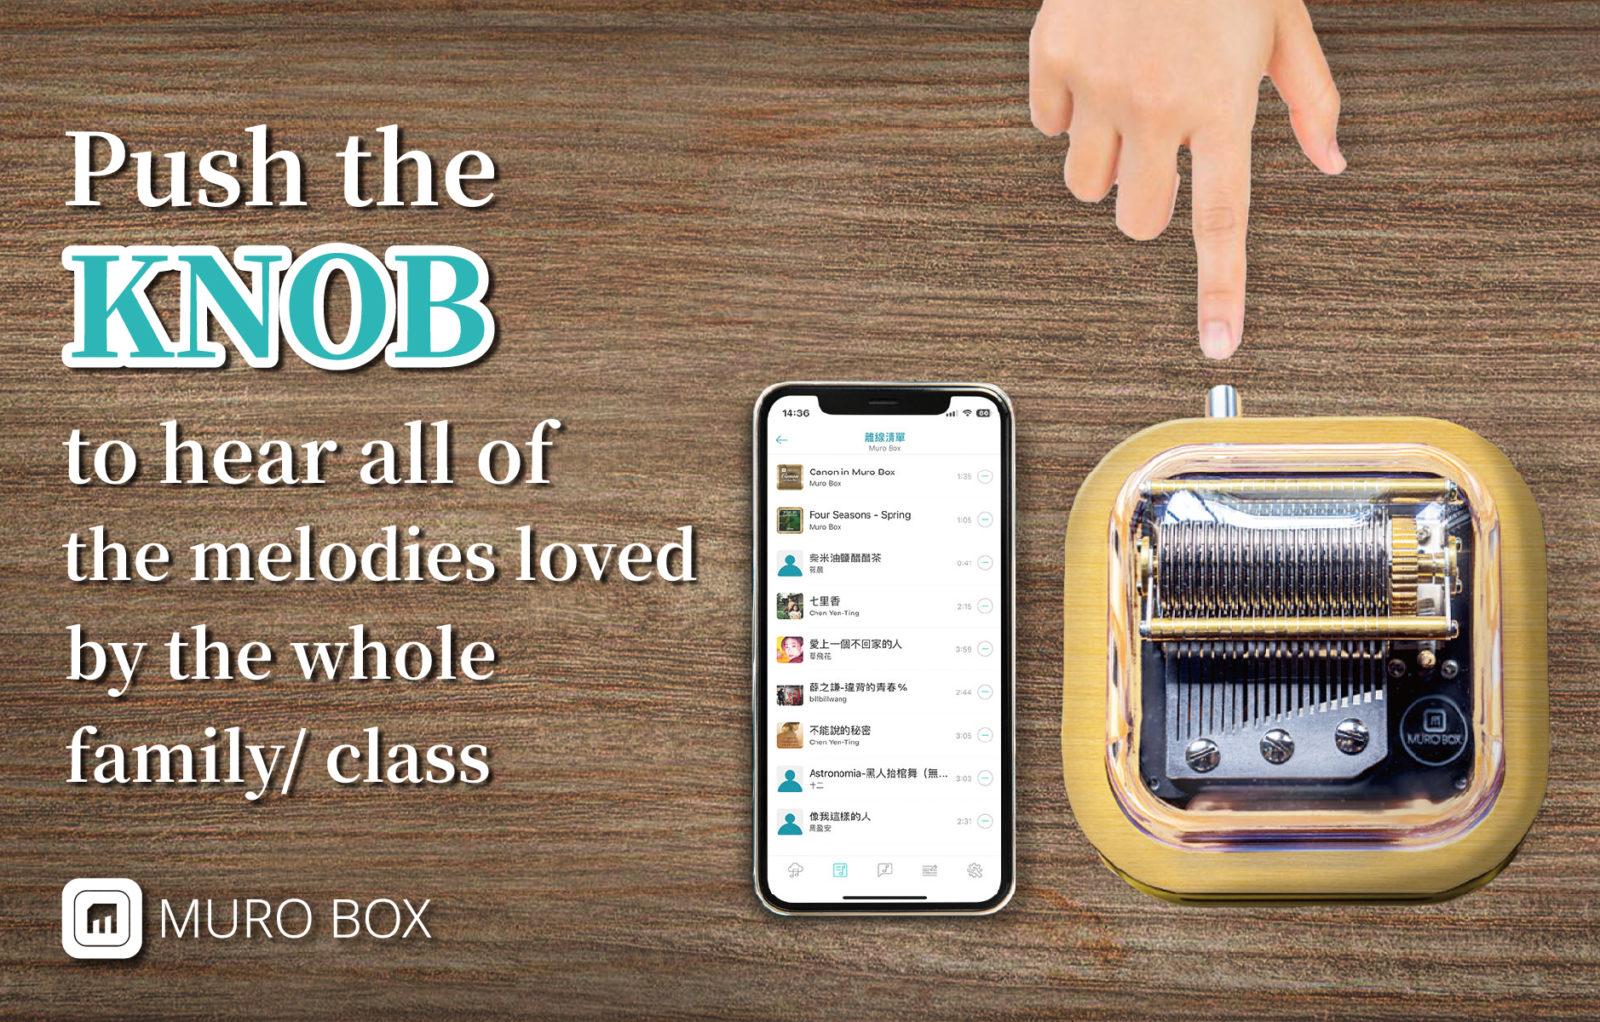 Any phone that has been paired with the Muro Box can share the offline playlist, and there is no limit to the number of people. You can add songs to the paired Muro Box's offline playlist. Once completed, you can use the knob to easily activate your Muro Box and play the music from the offline playlist!